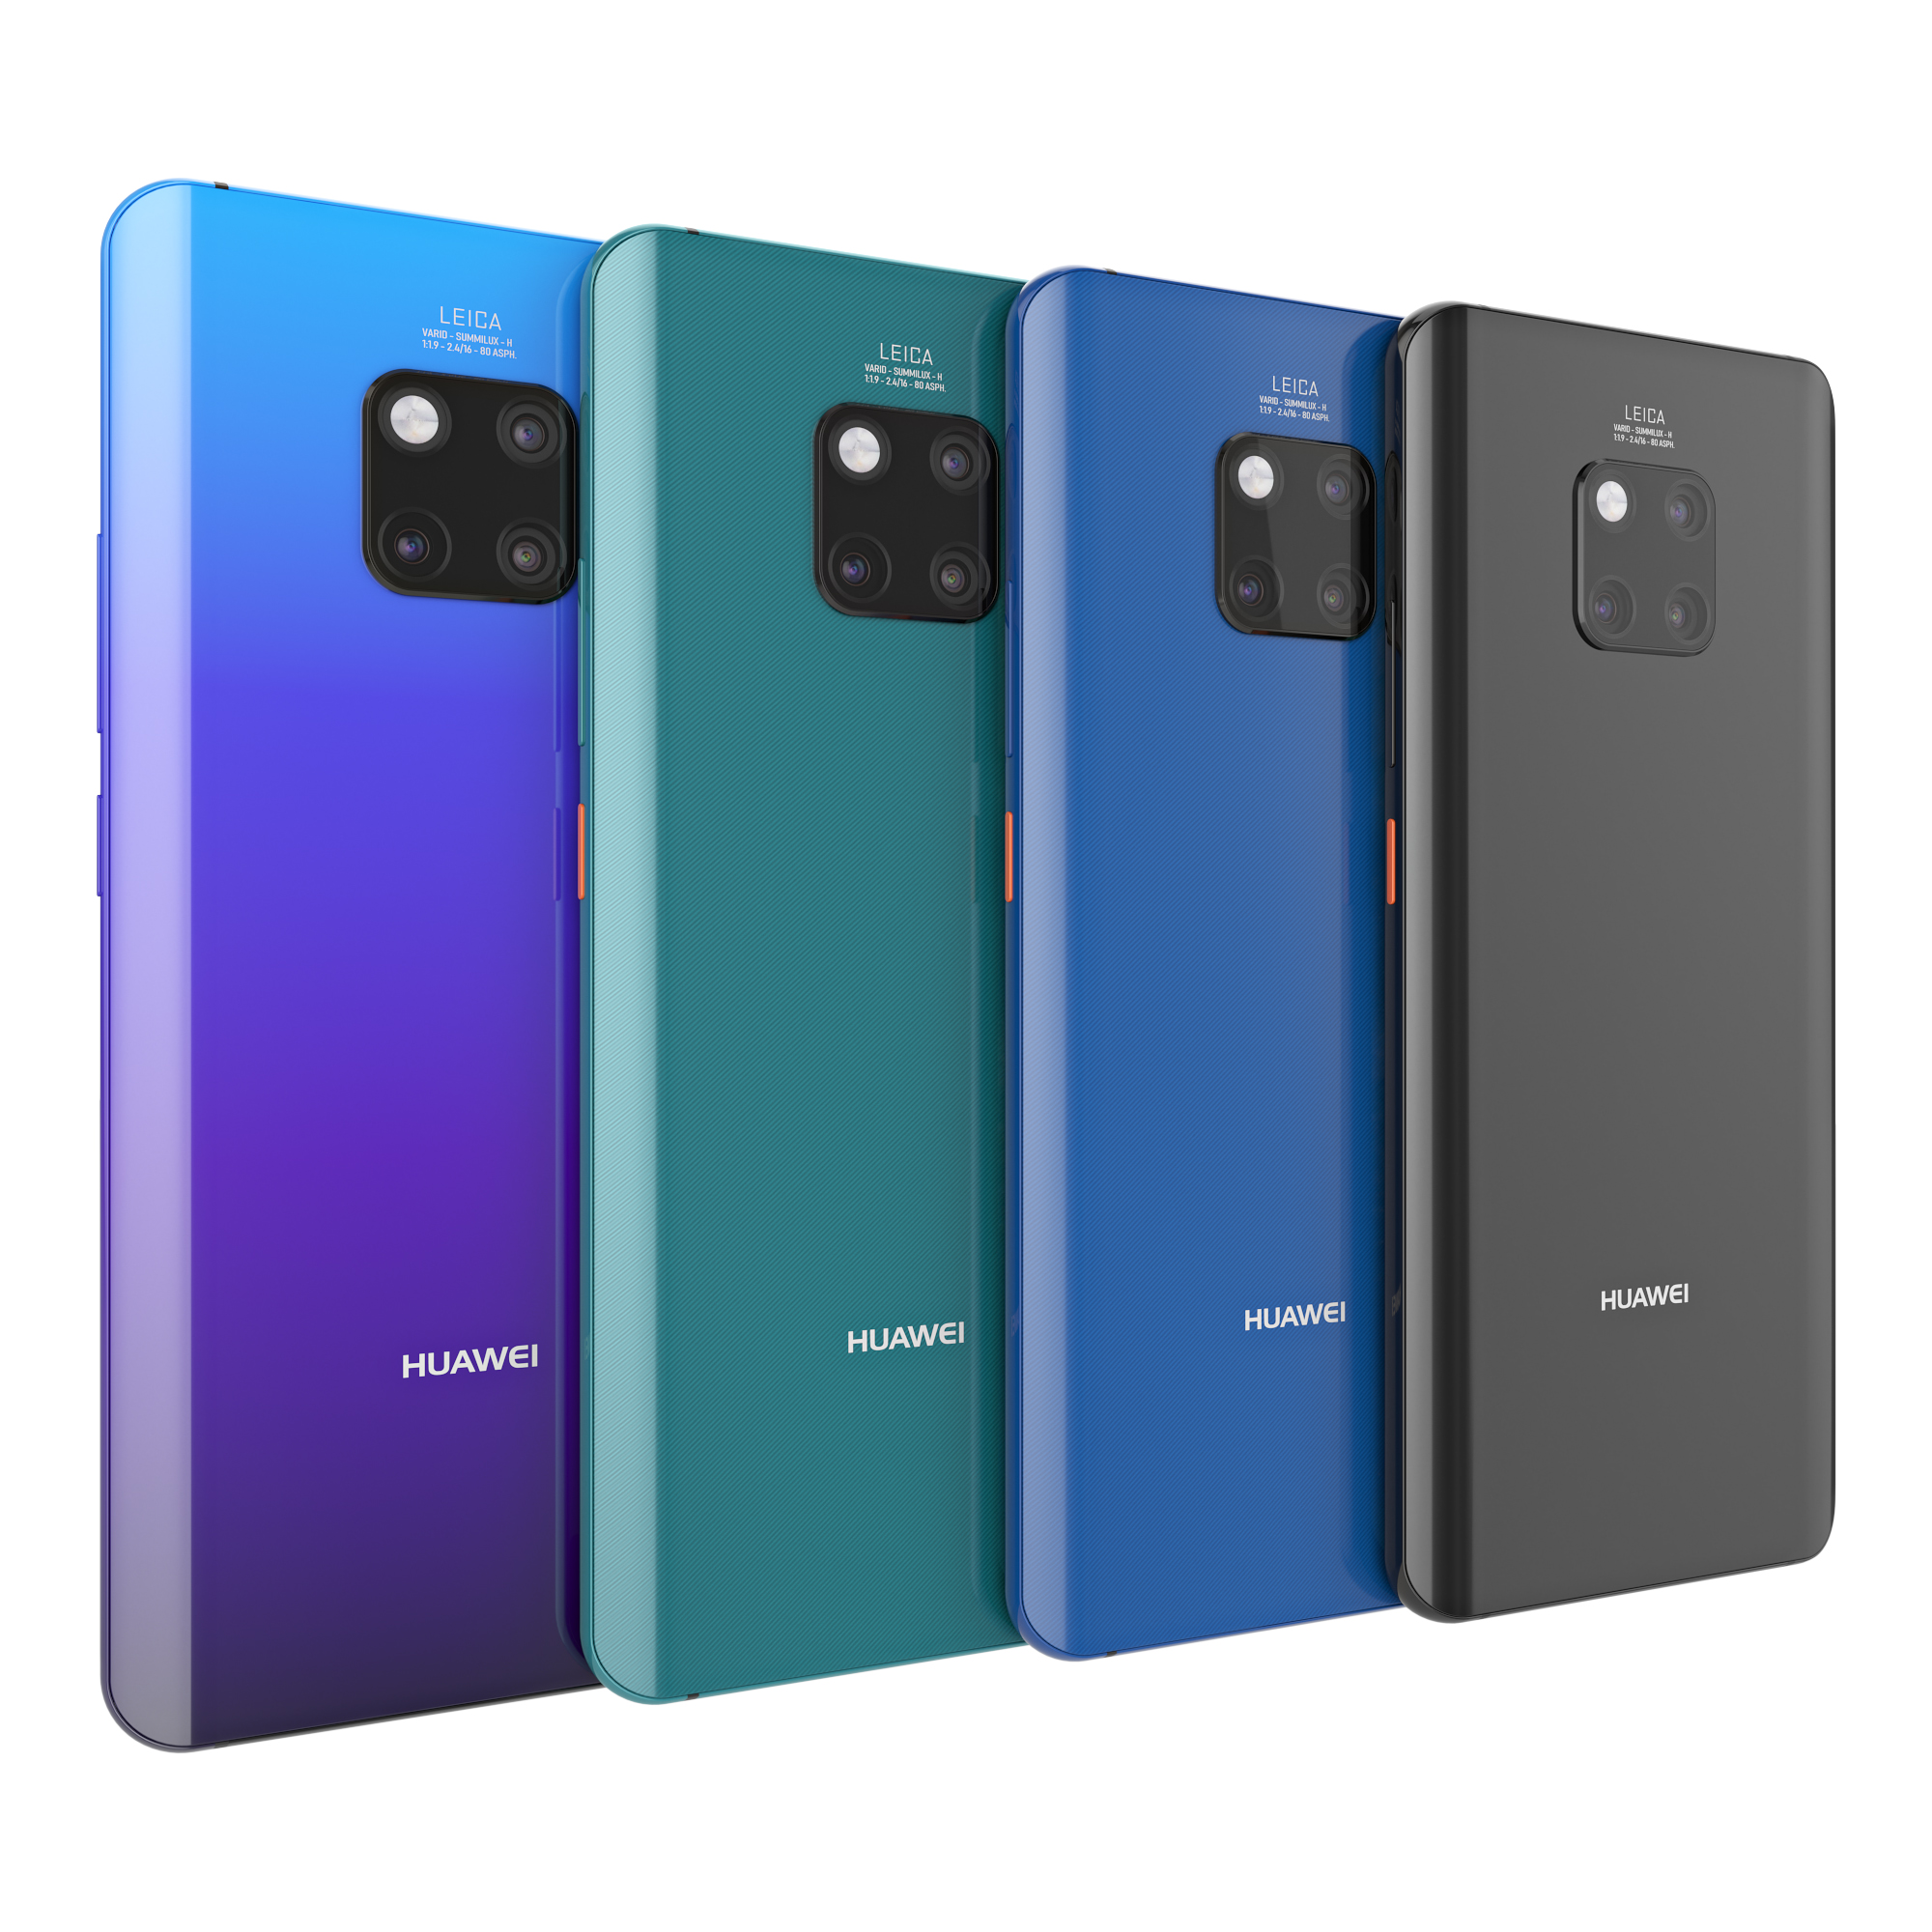 dichters Actie geur Huawei mate 20 pro all color by RensiCG | 3DOcean